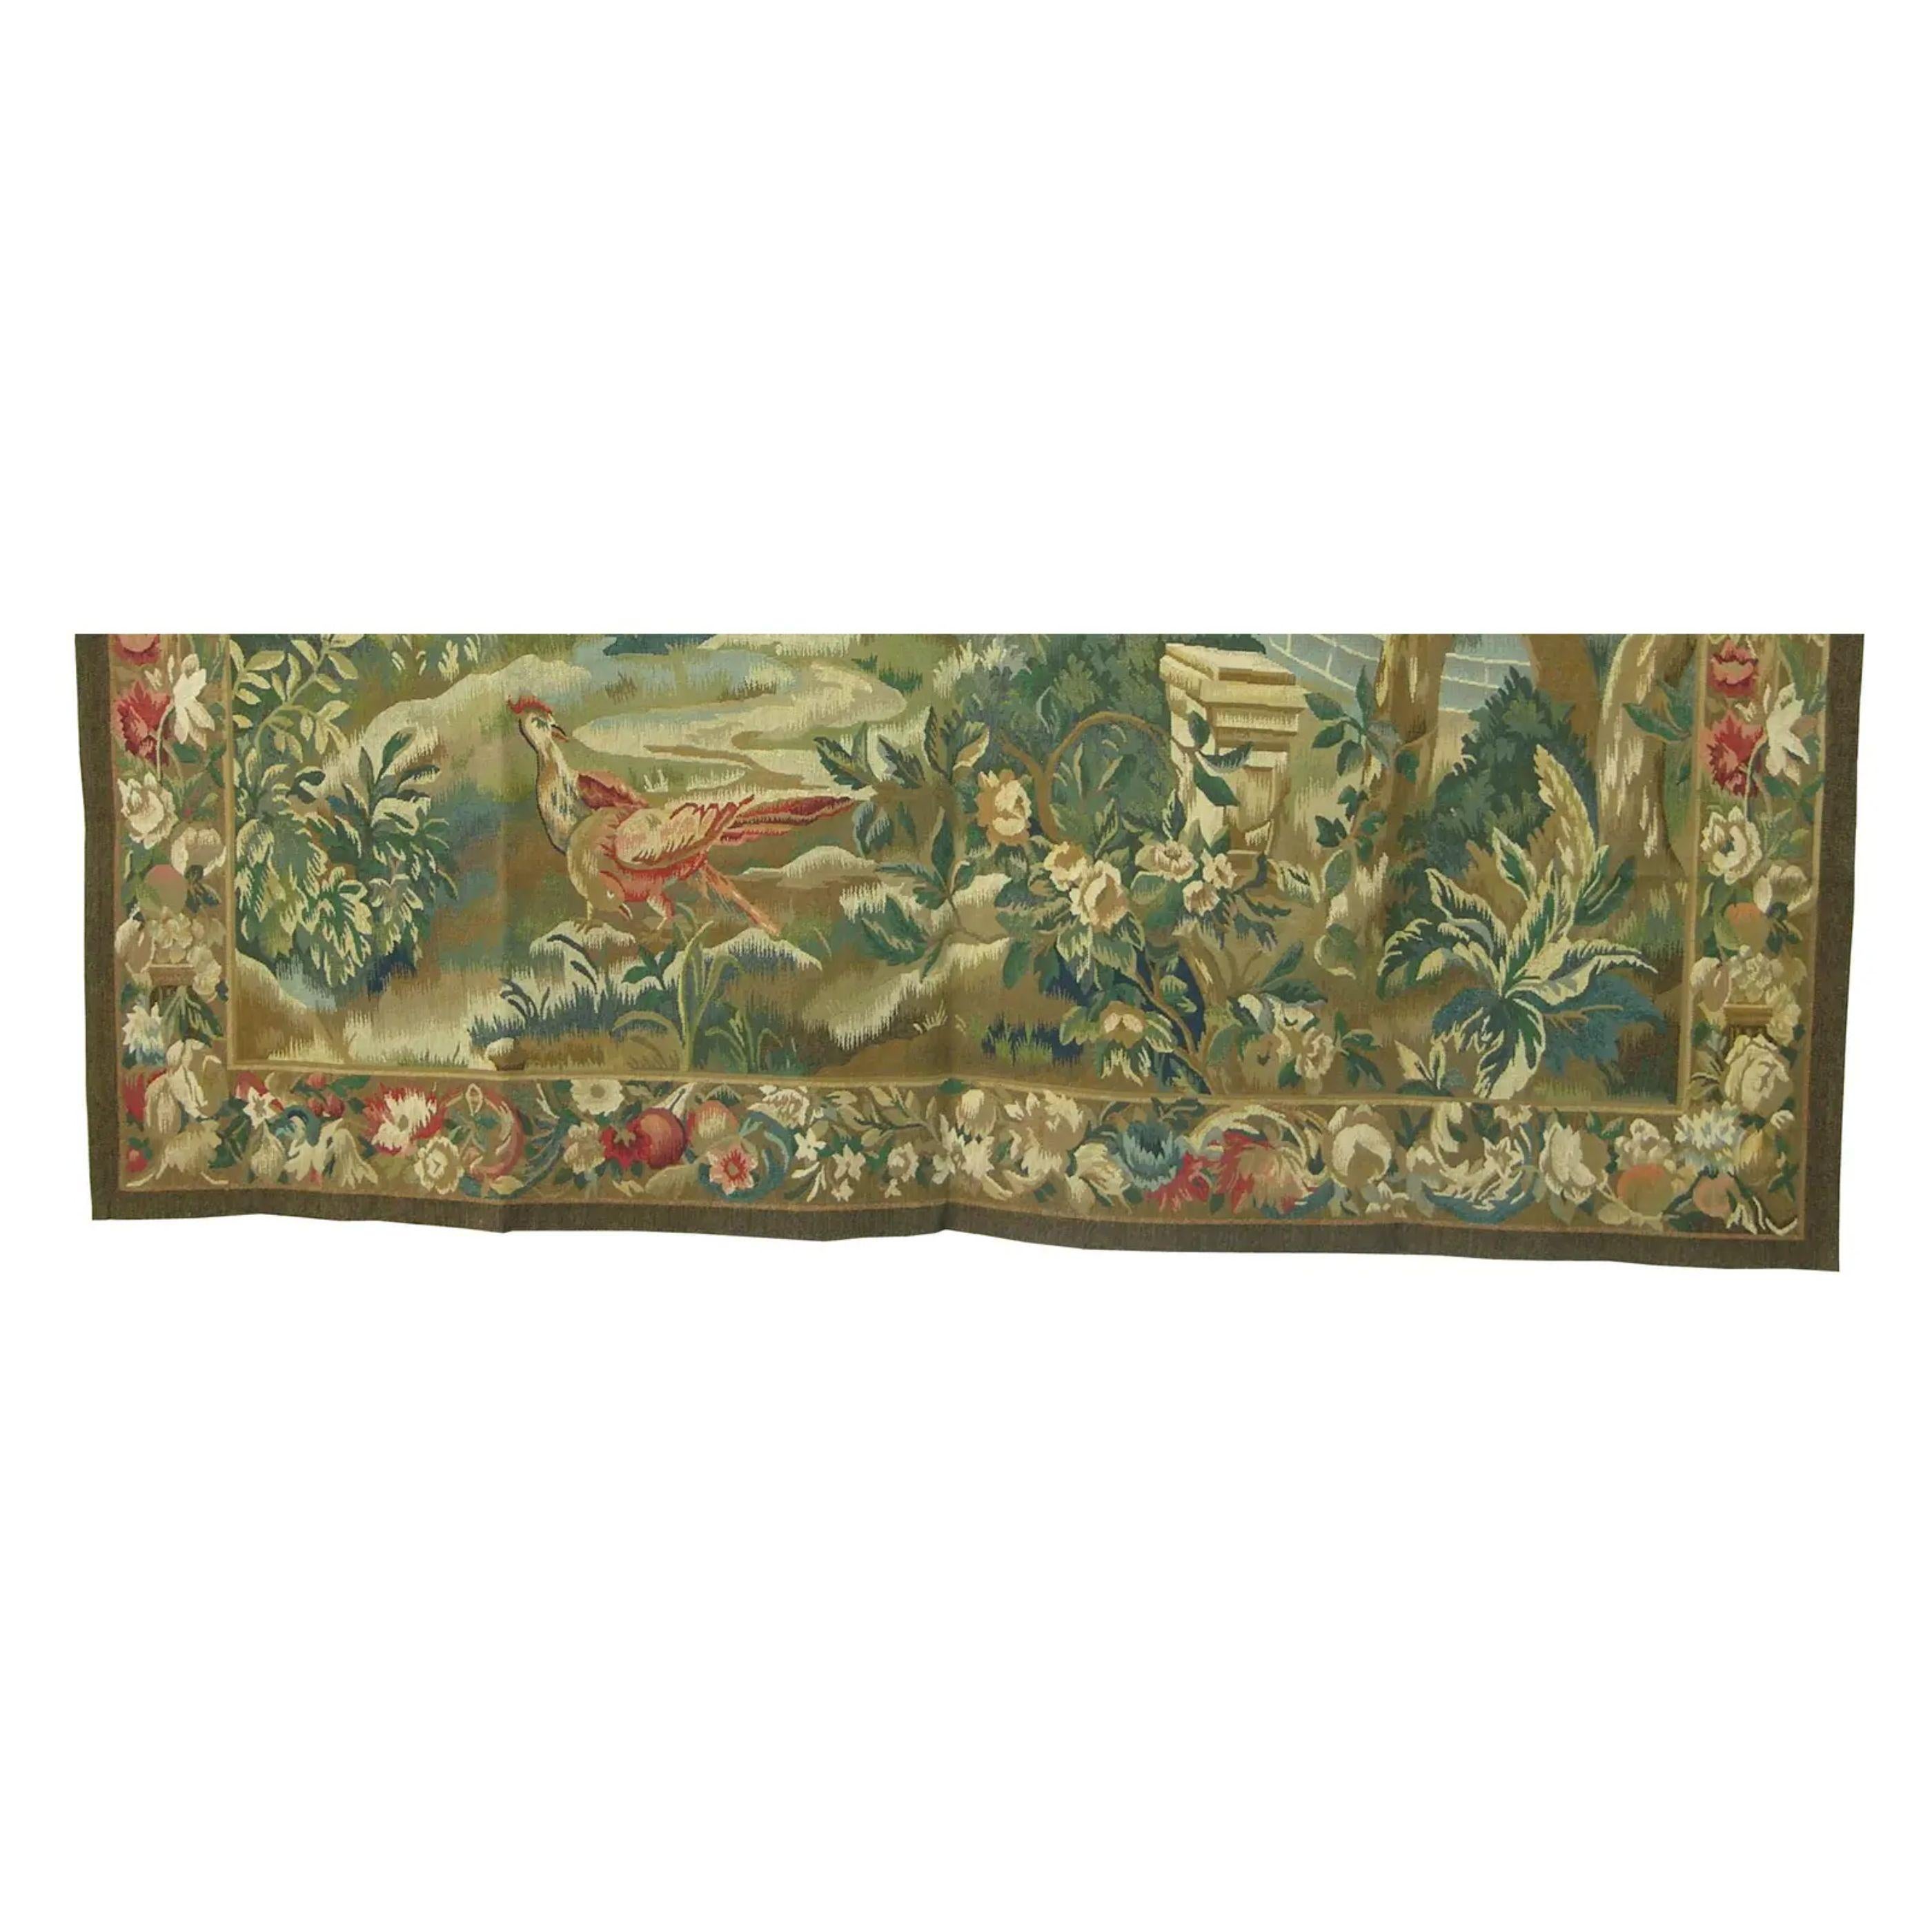 Unknown Vintage Tapestry Depicting A Rooster 5.8X3.11